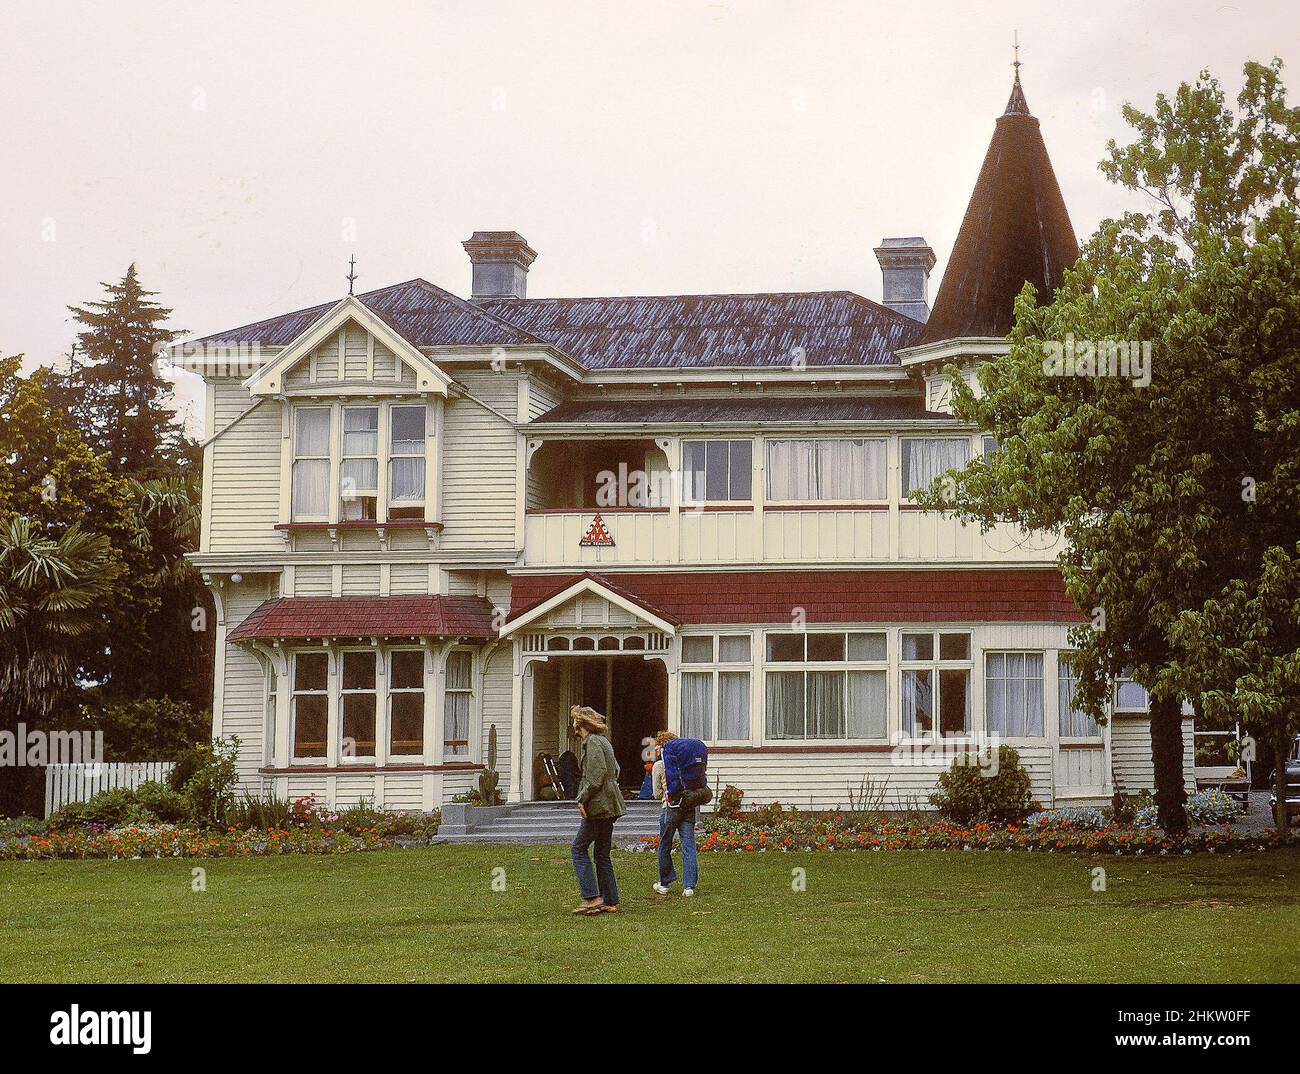 Young travellers arrive at Cora Wilding Youth Hostel, Avesbury Park, Christchurch, NZ (1972). The property is now an events venue. Stock Photo